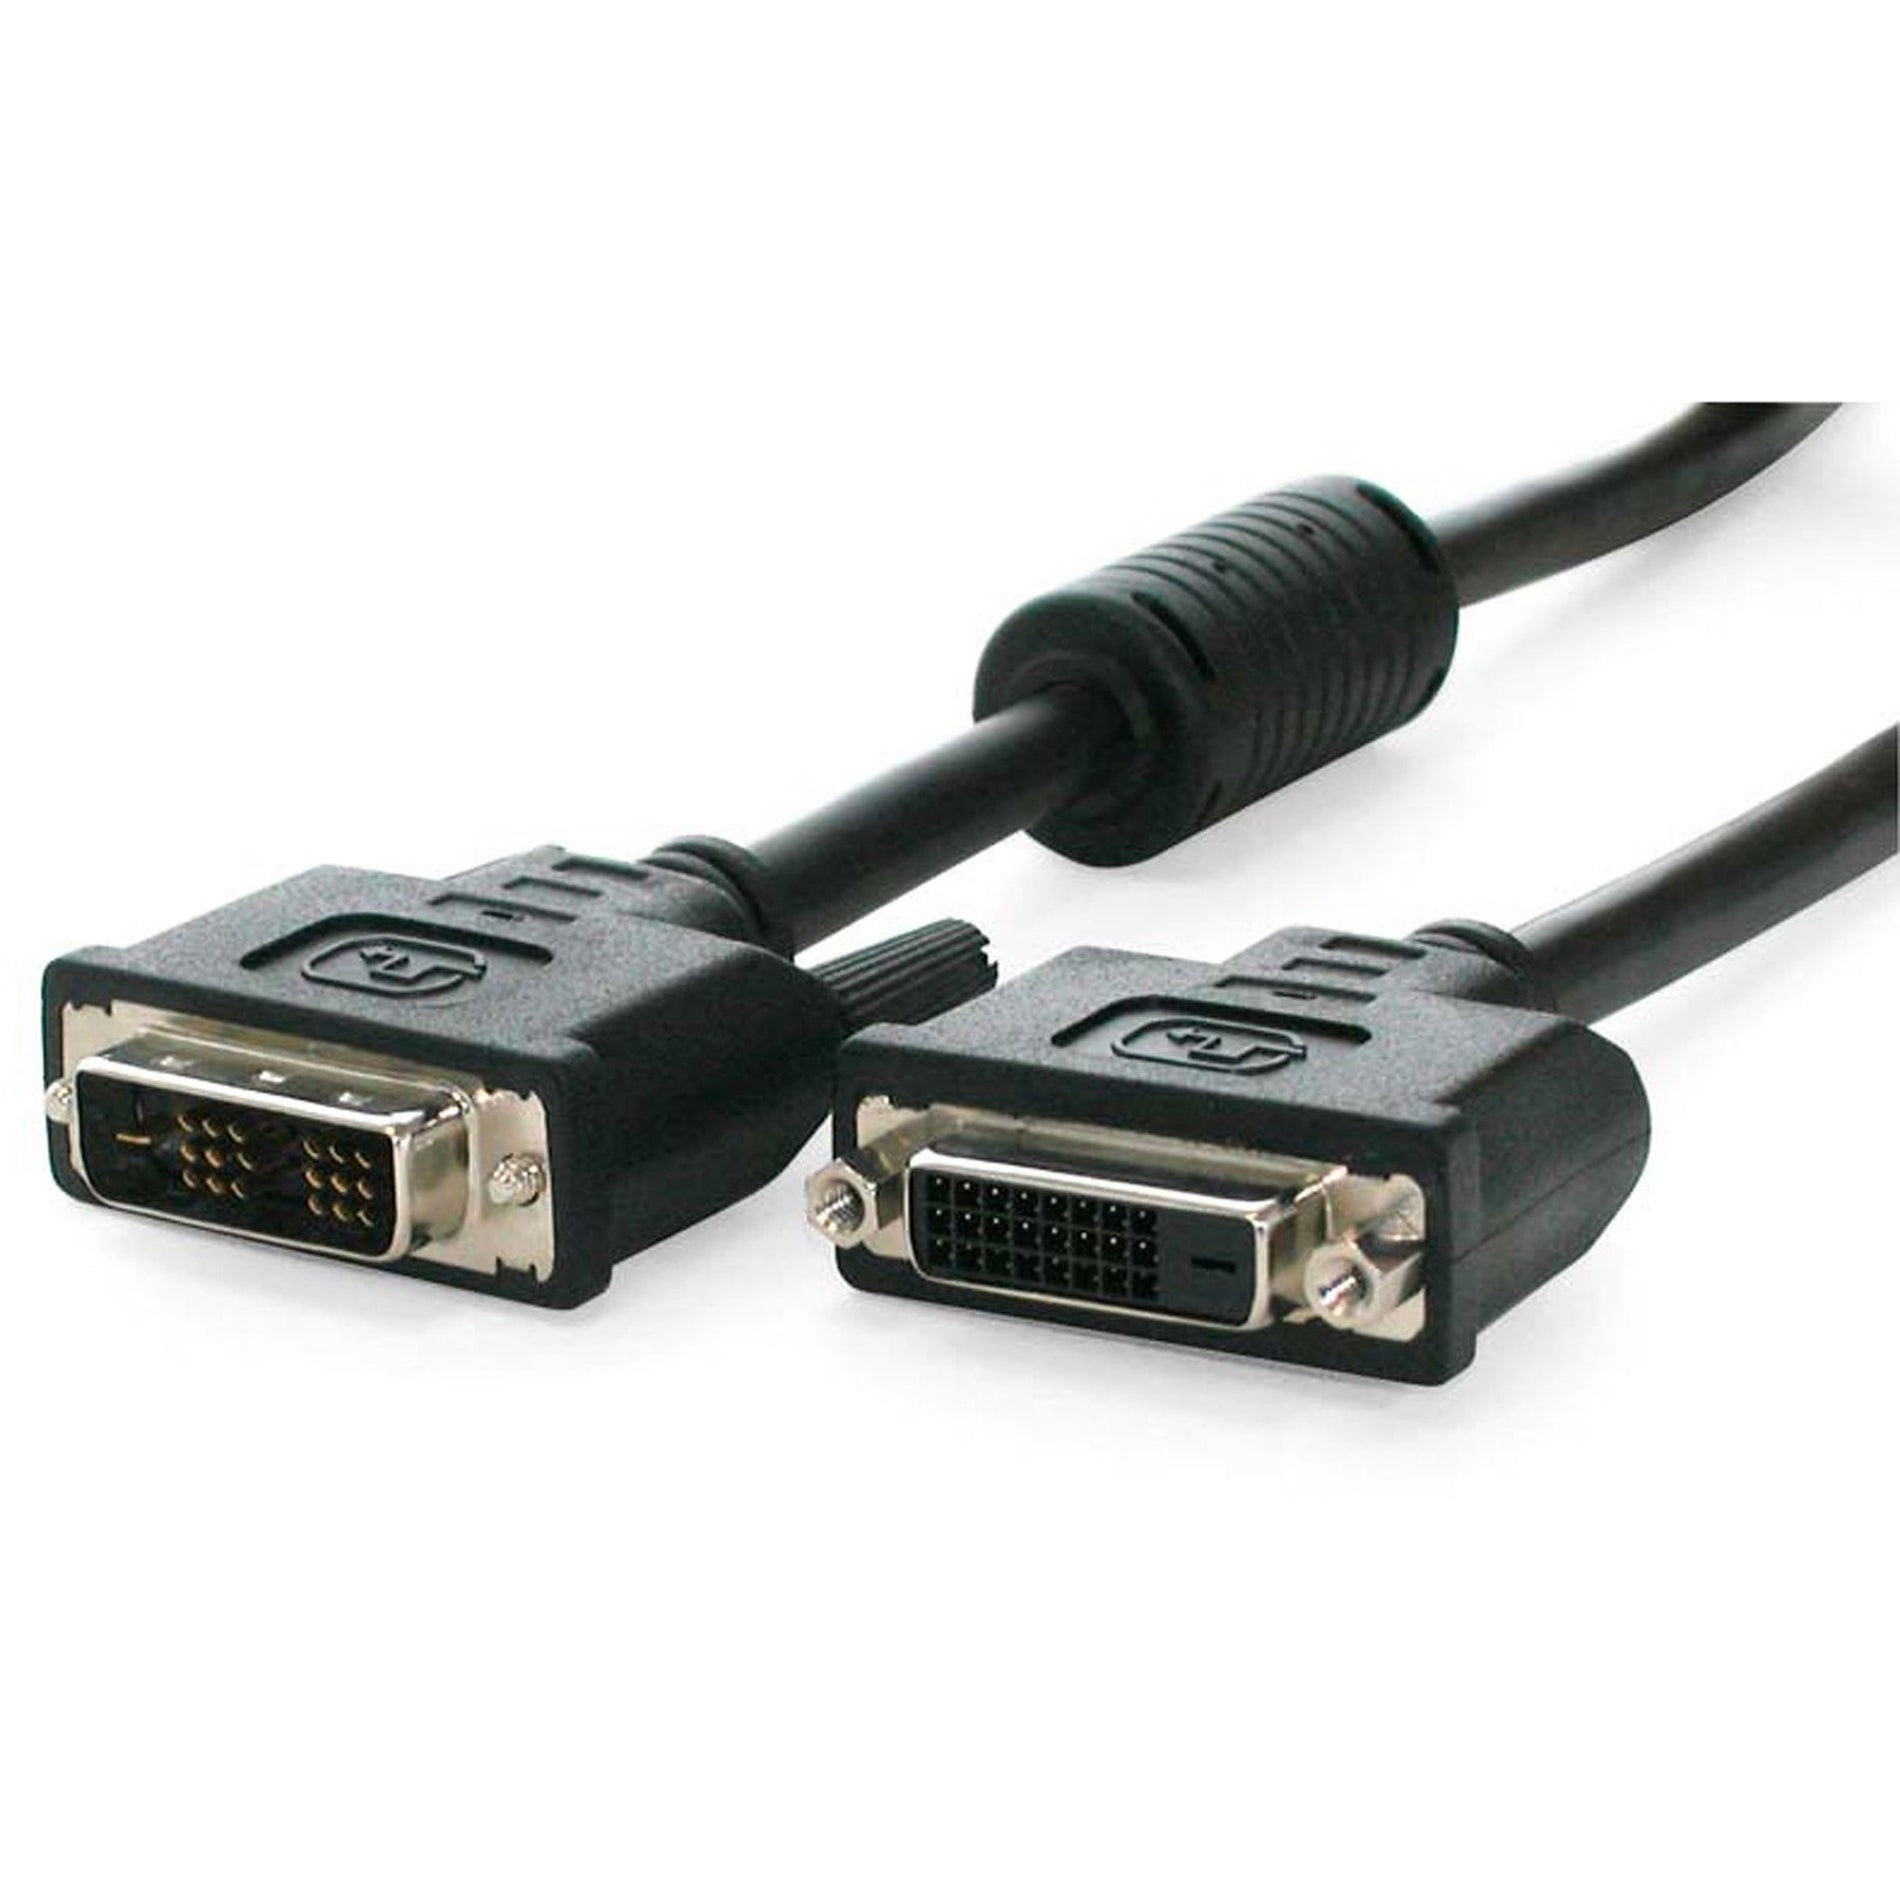 StarTech.com DVIDSMF10 10 ft DVI-D Single Link Extension Cable, Strain Relief, Molded, 5 Gbit/s Data Transfer Rate [Discontinued]